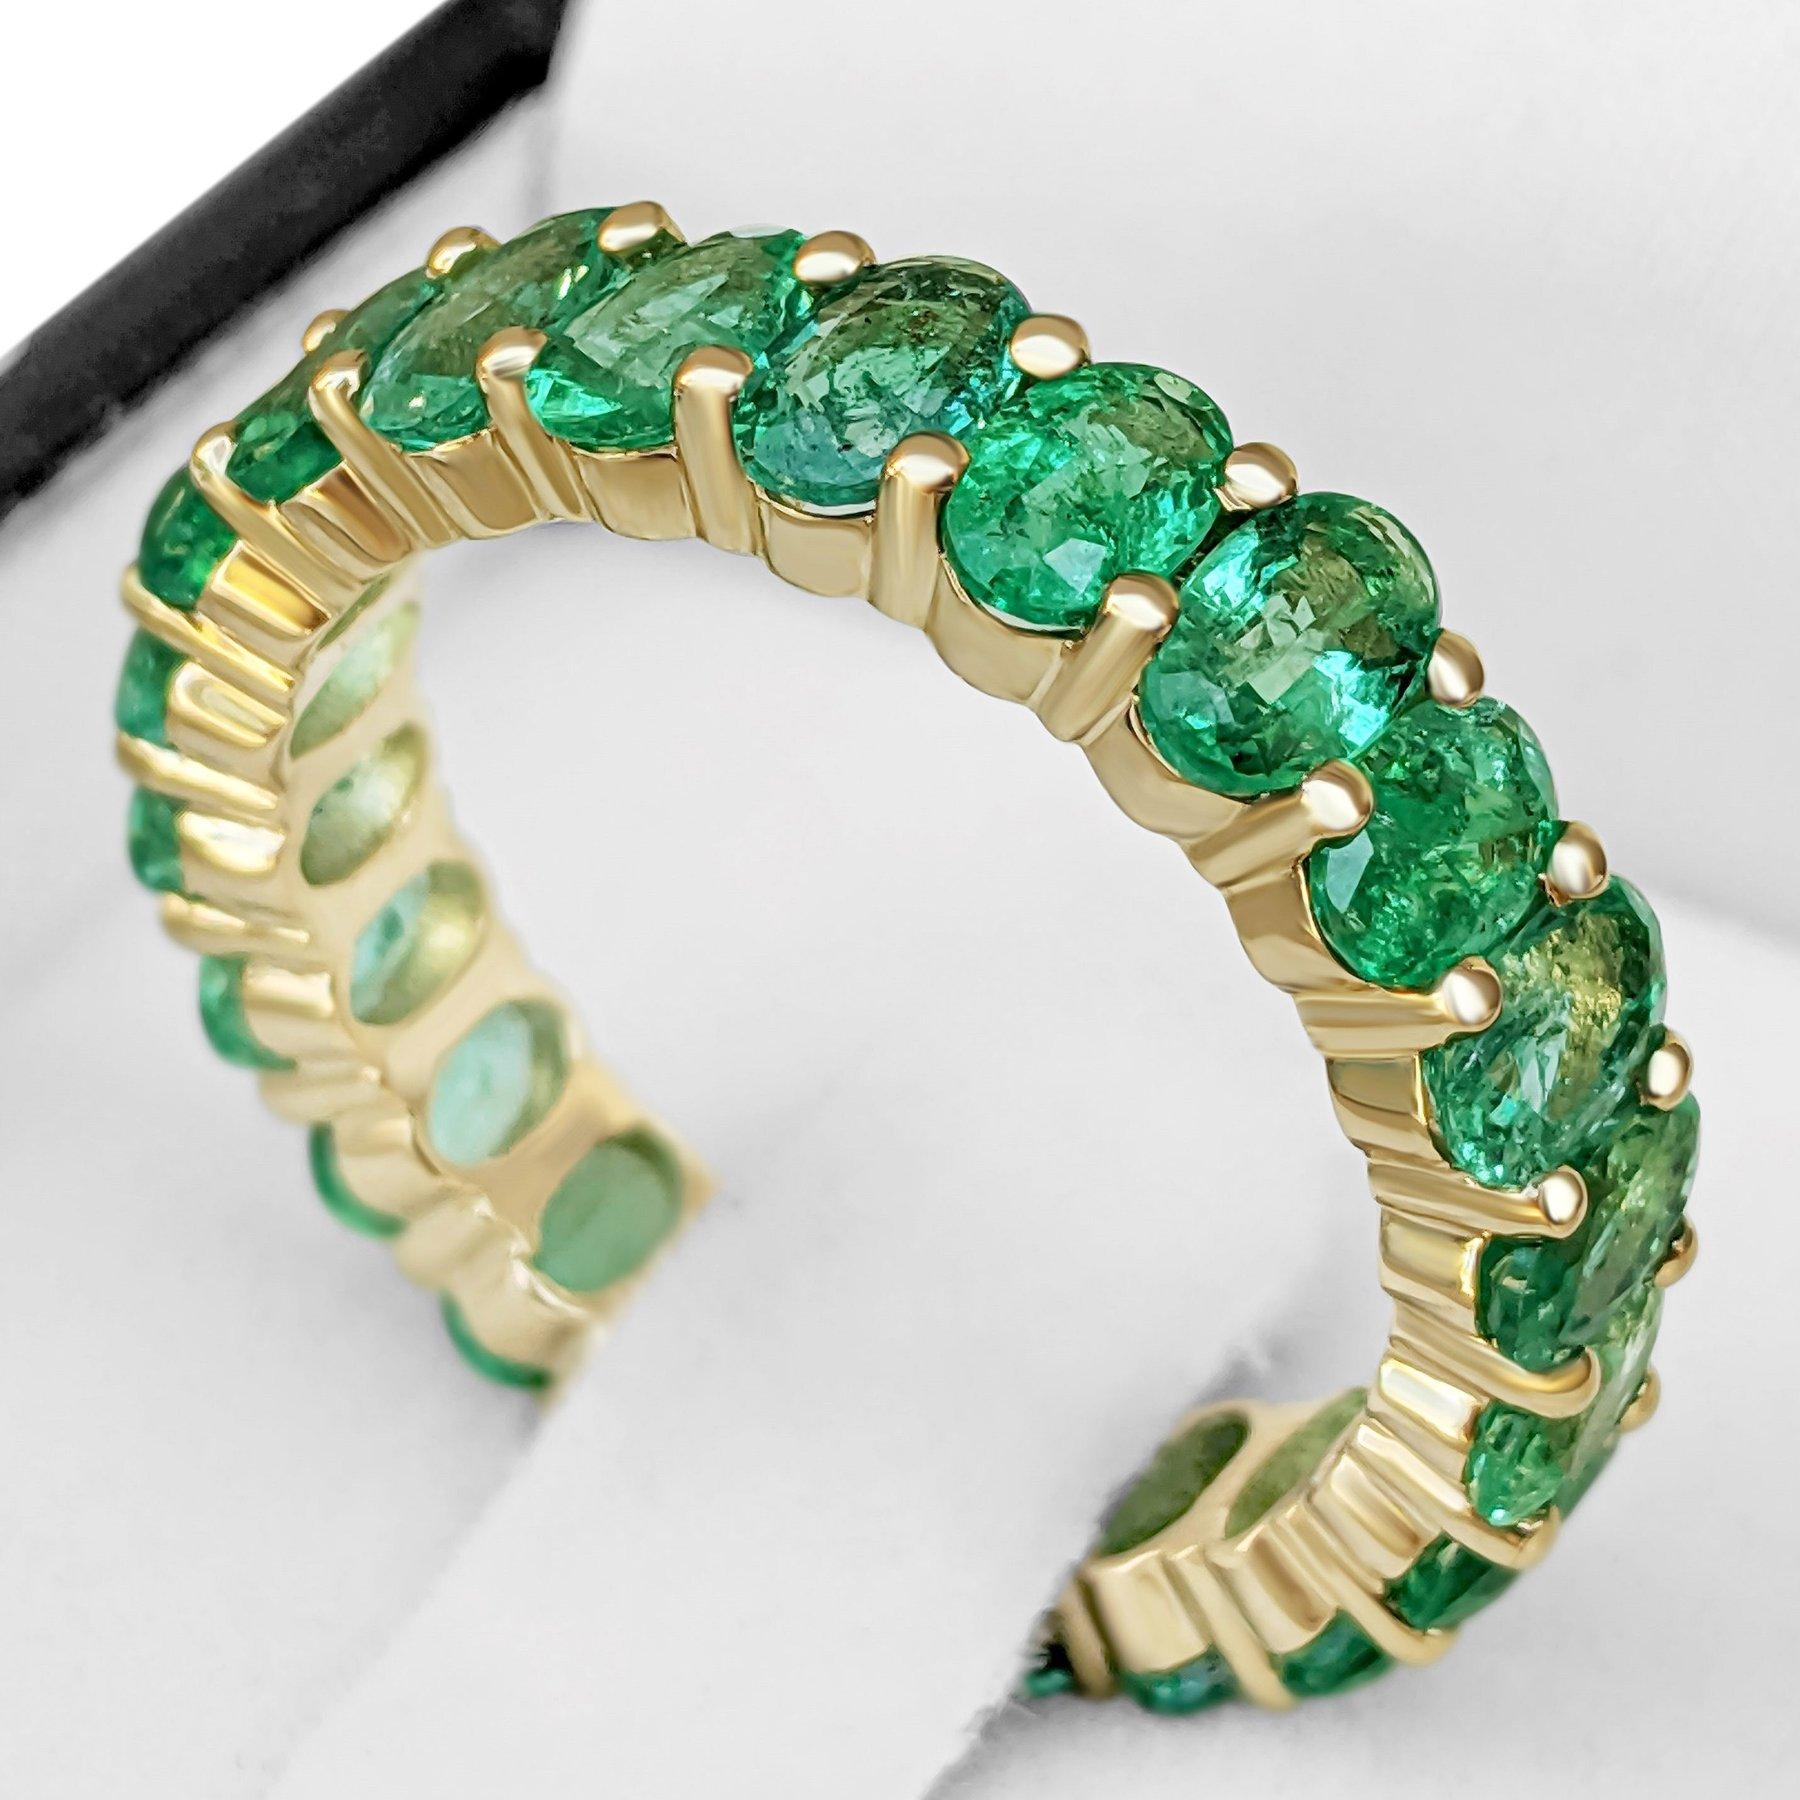 This ring is definitely a show stopper and will draw attention wherever you go! A great gift for yourself or your loved one - a heirloom piece to treasure forever!

Ring Size: 58.5 EU

Center Natural Emeralds:
Weight: 3.80 ct, 22 stones
Color: